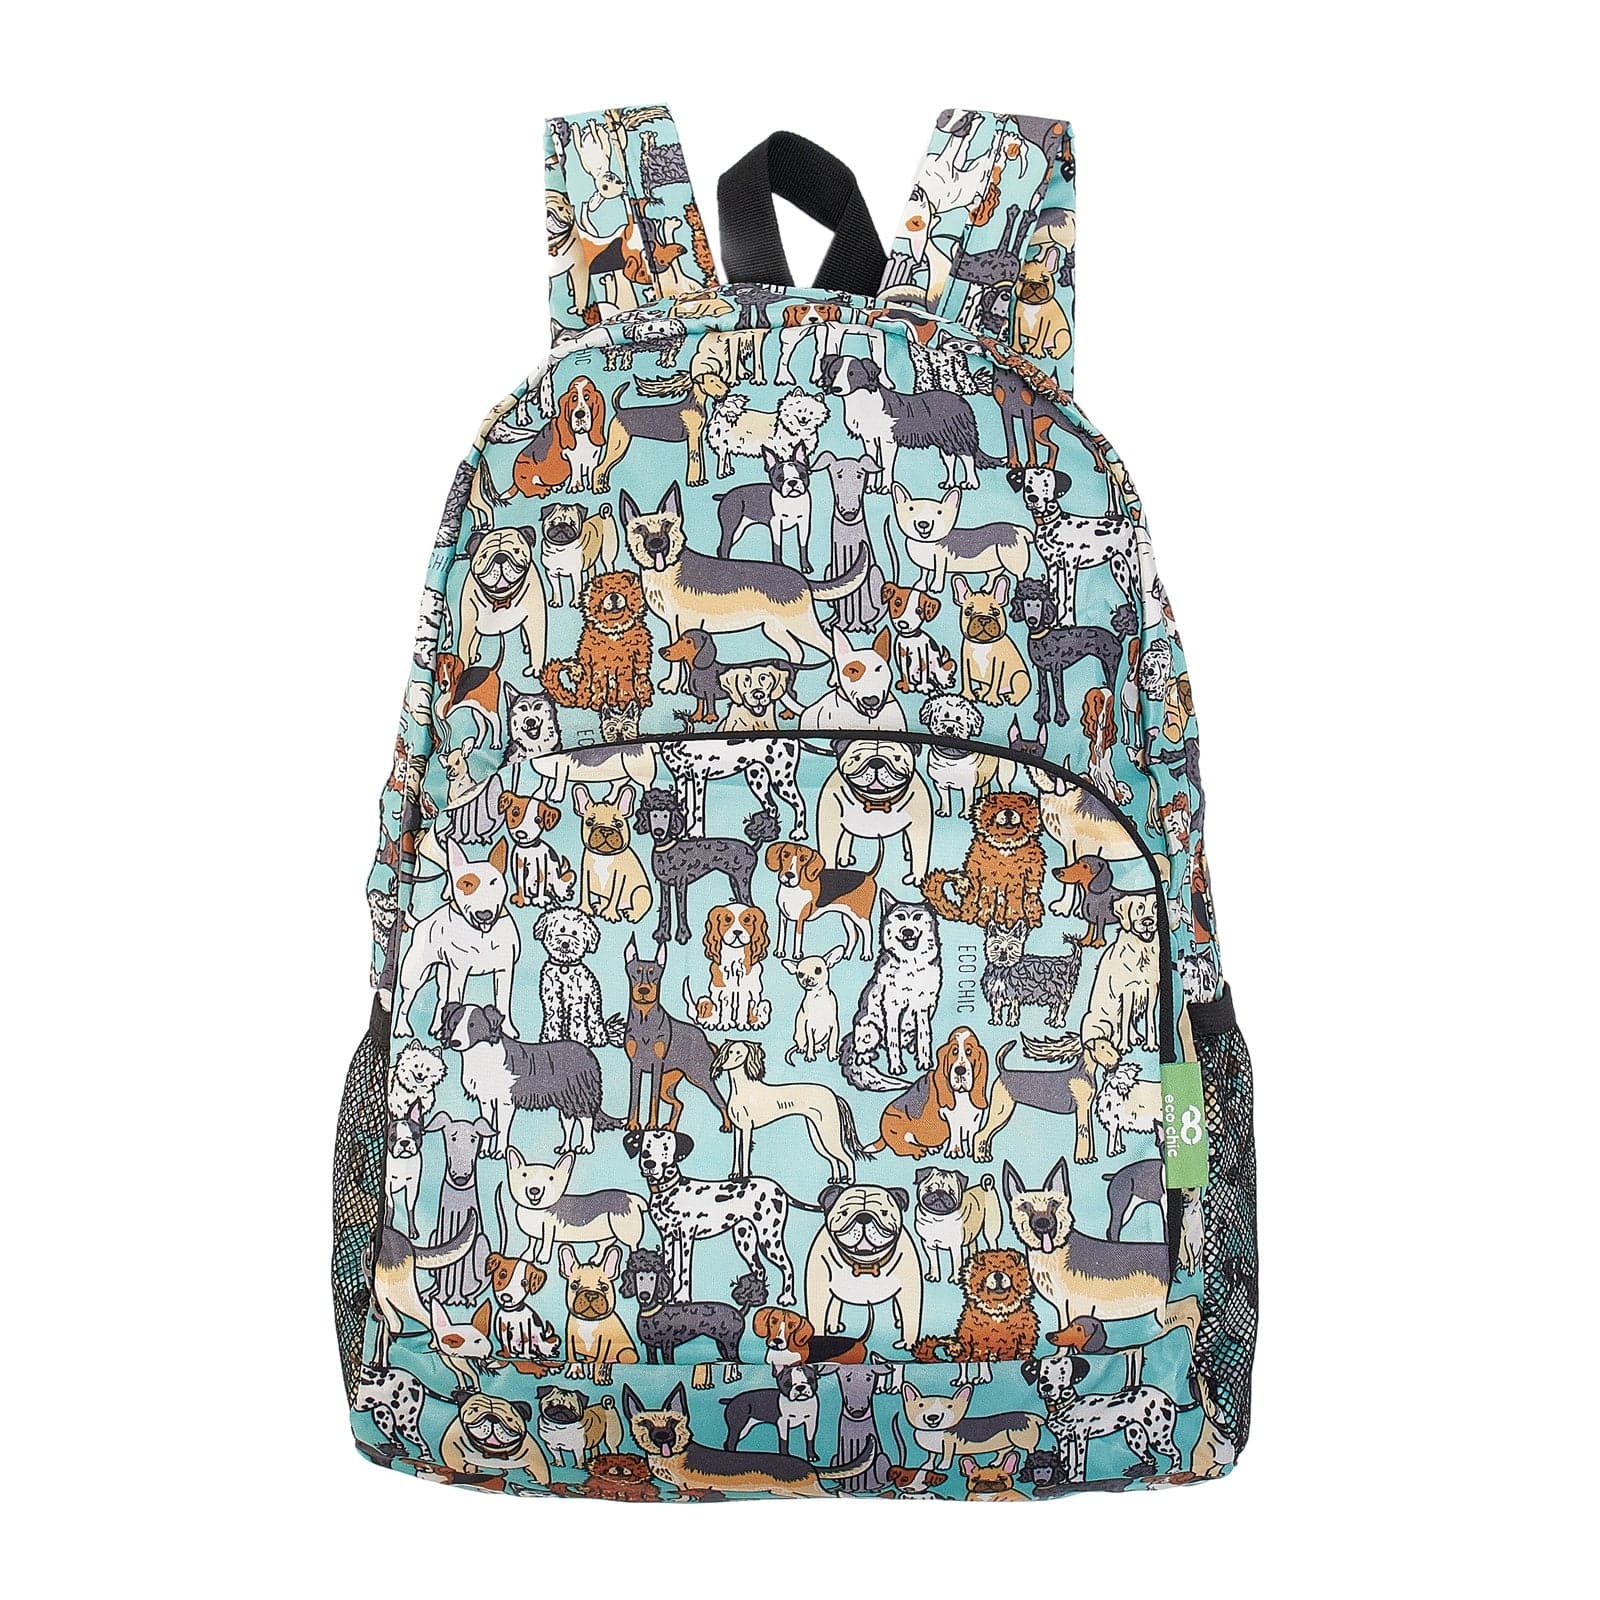 Eco Chic Teal Eco Chic Lightweight Foldable Backpack Dogs